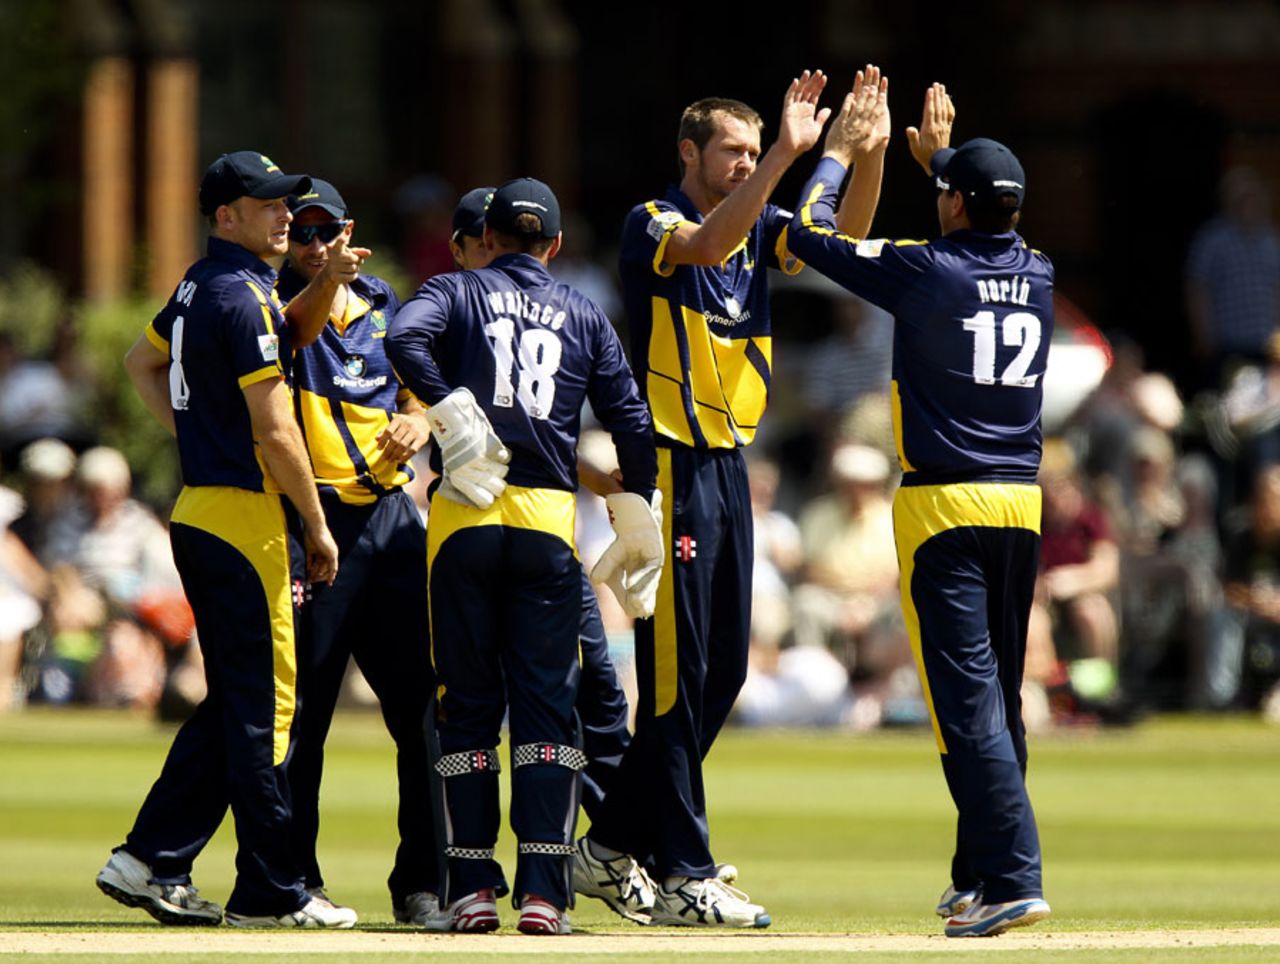 Michael Hogan gets a high five for one of his three wickets, Warwickshire v Glamorgan, FLt20 Midlands/Wales/West Group, Rugby, July 6, 2013